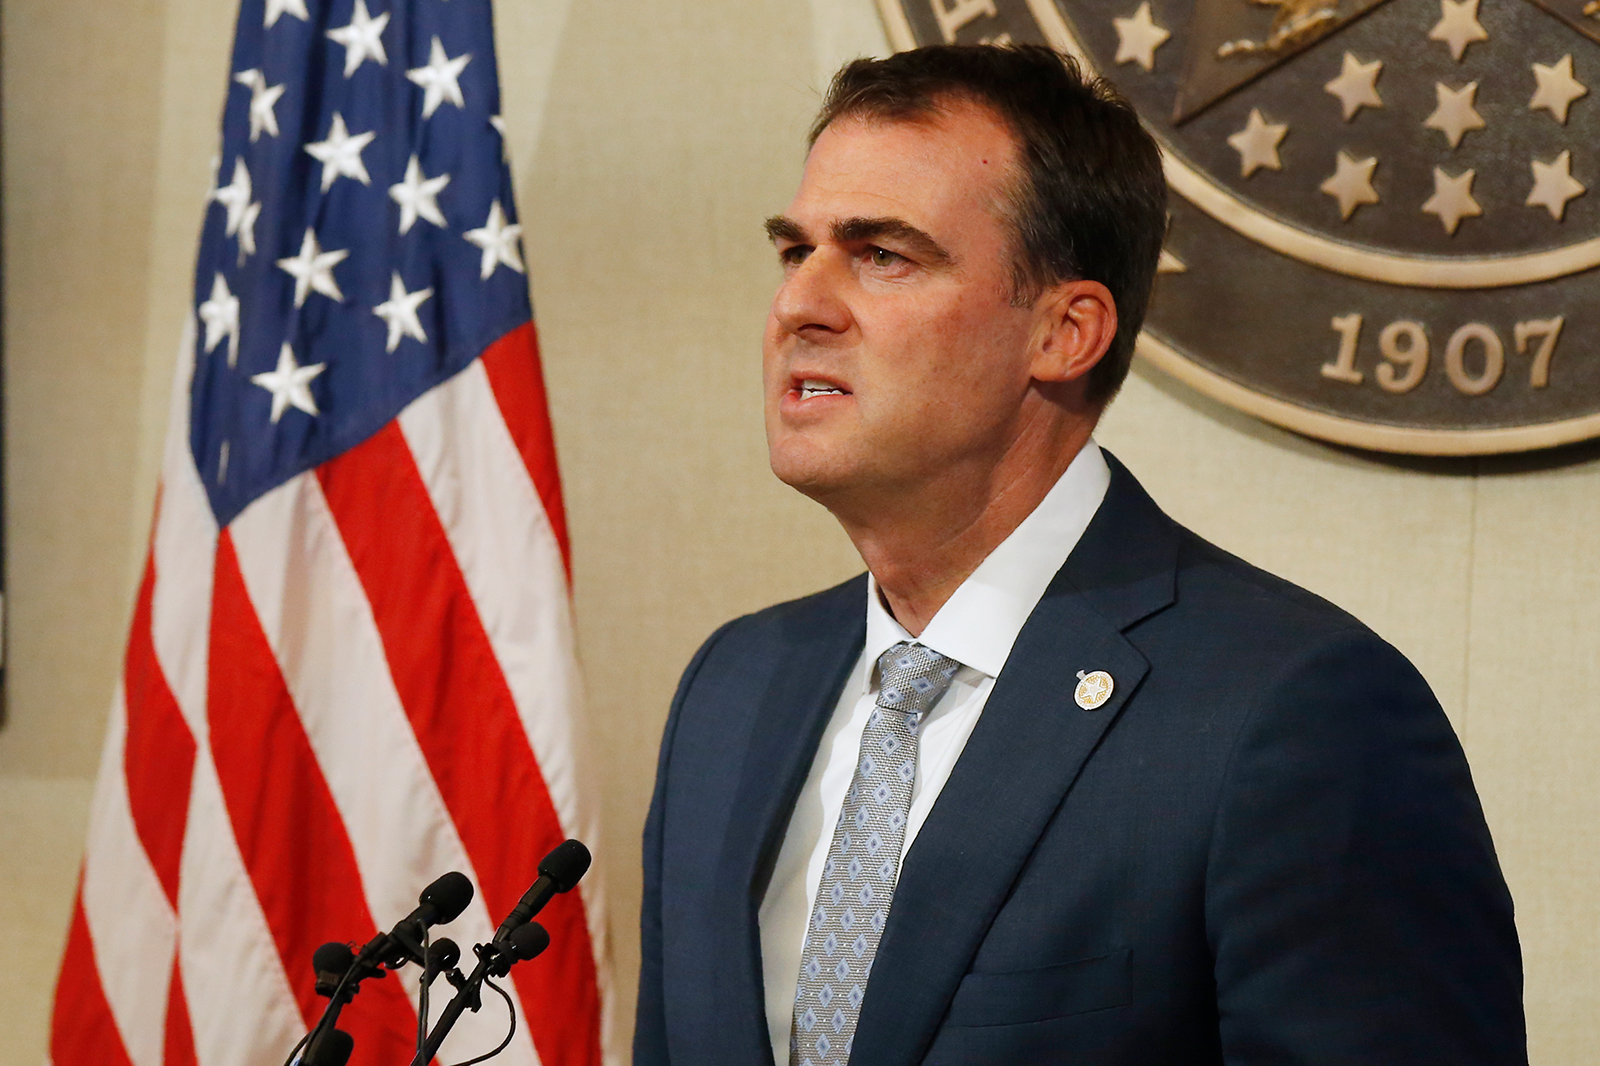 Oklahoma Gov. Kevin Stitt speaks during a news conference in Oklahoma City, on May 14.